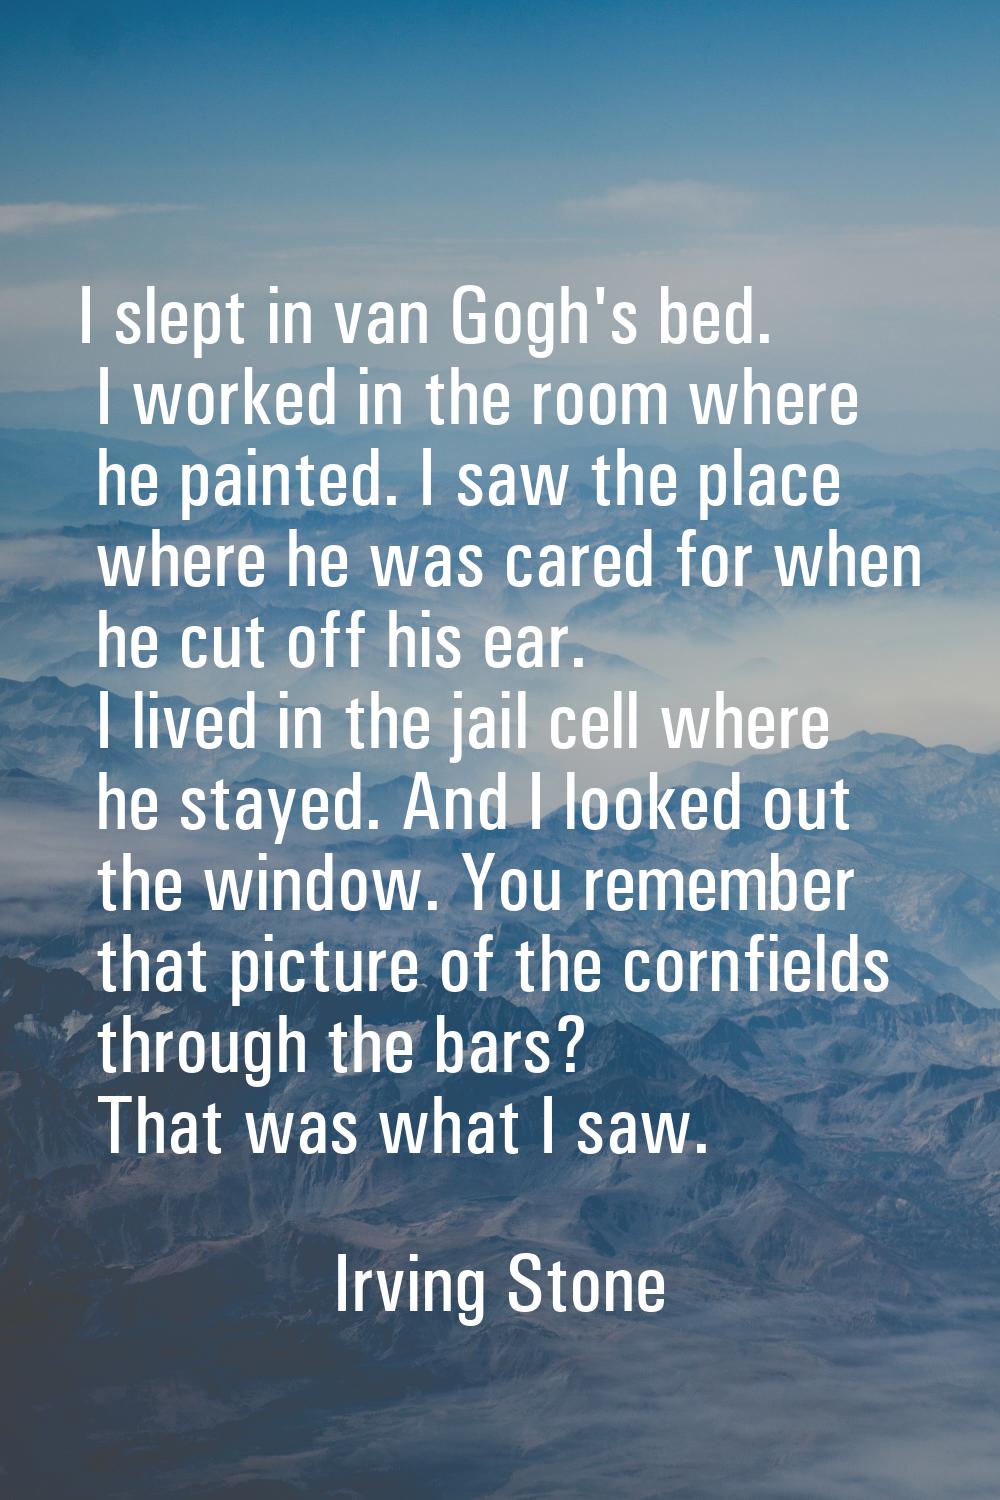 I slept in van Gogh's bed. I worked in the room where he painted. I saw the place where he was care